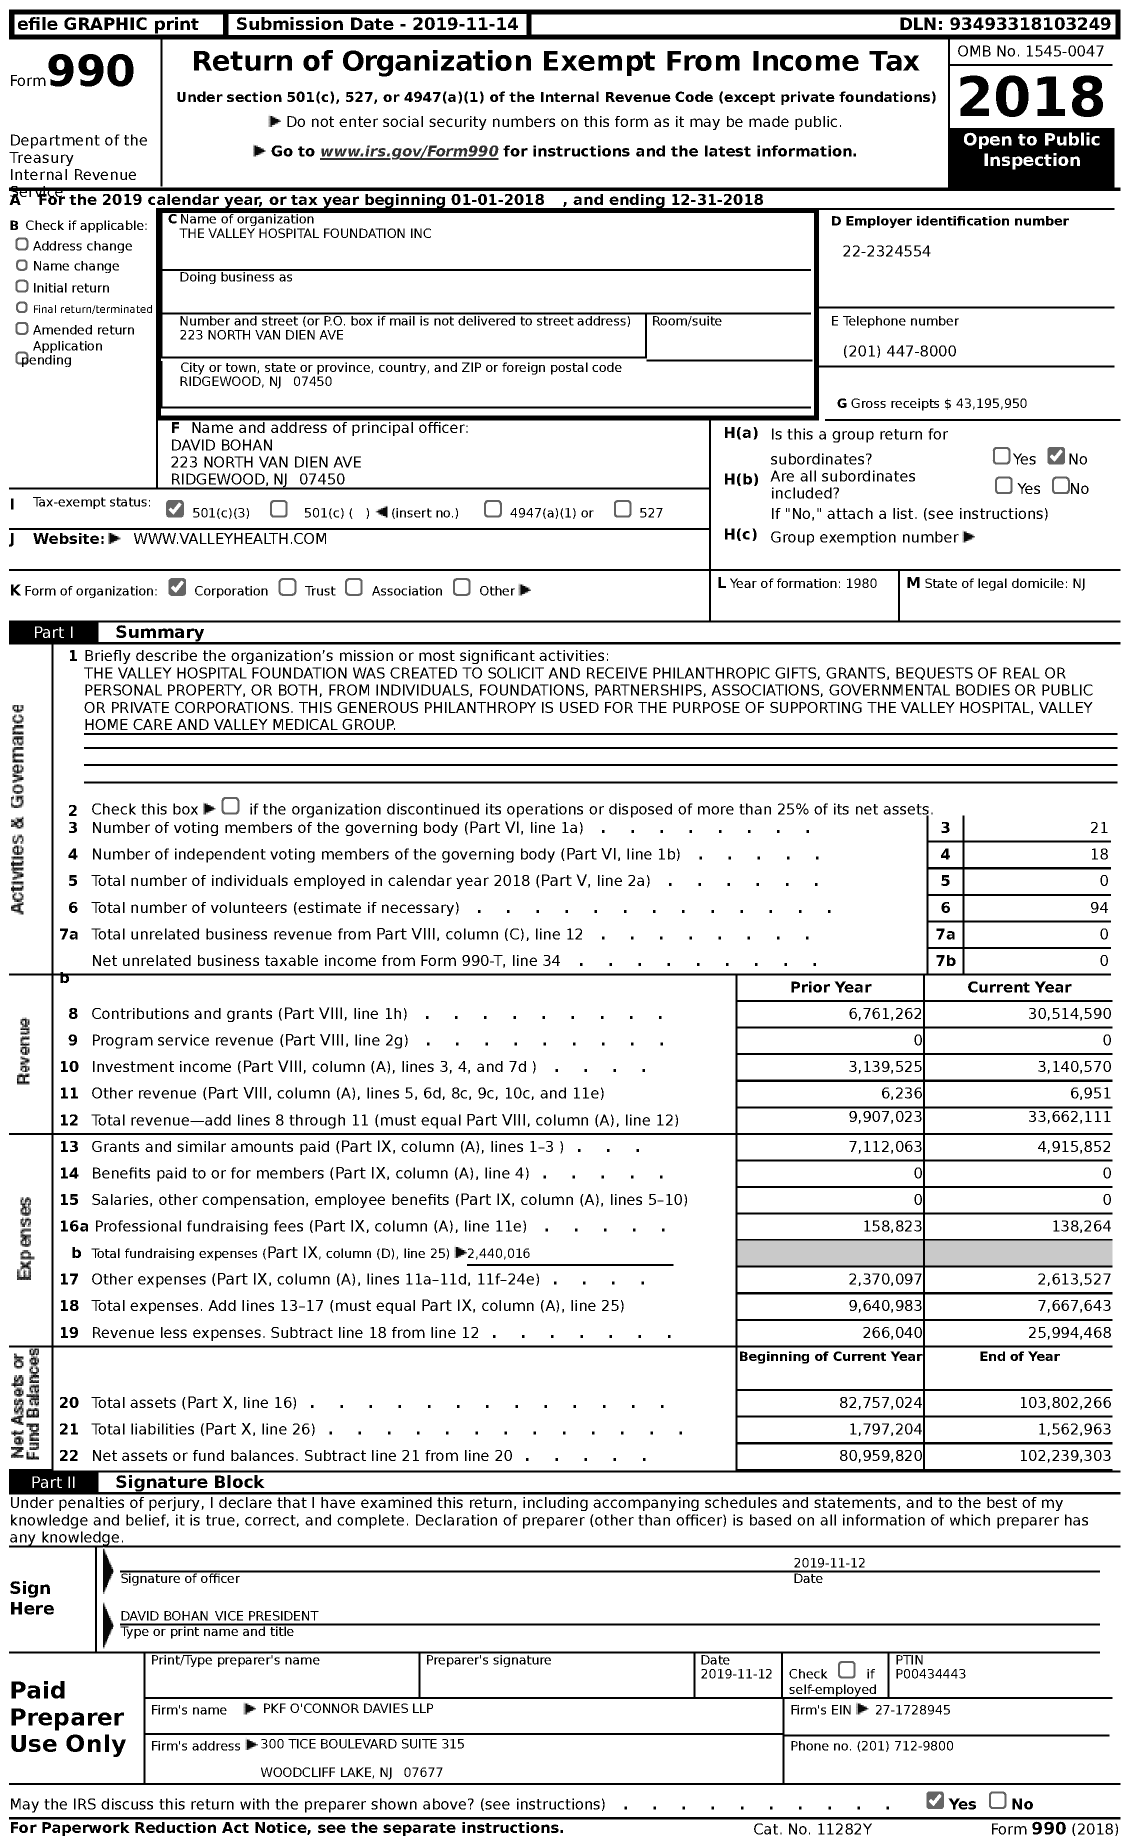 Image of first page of 2018 Form 990 for Valley Hospital Foundation (VHF)